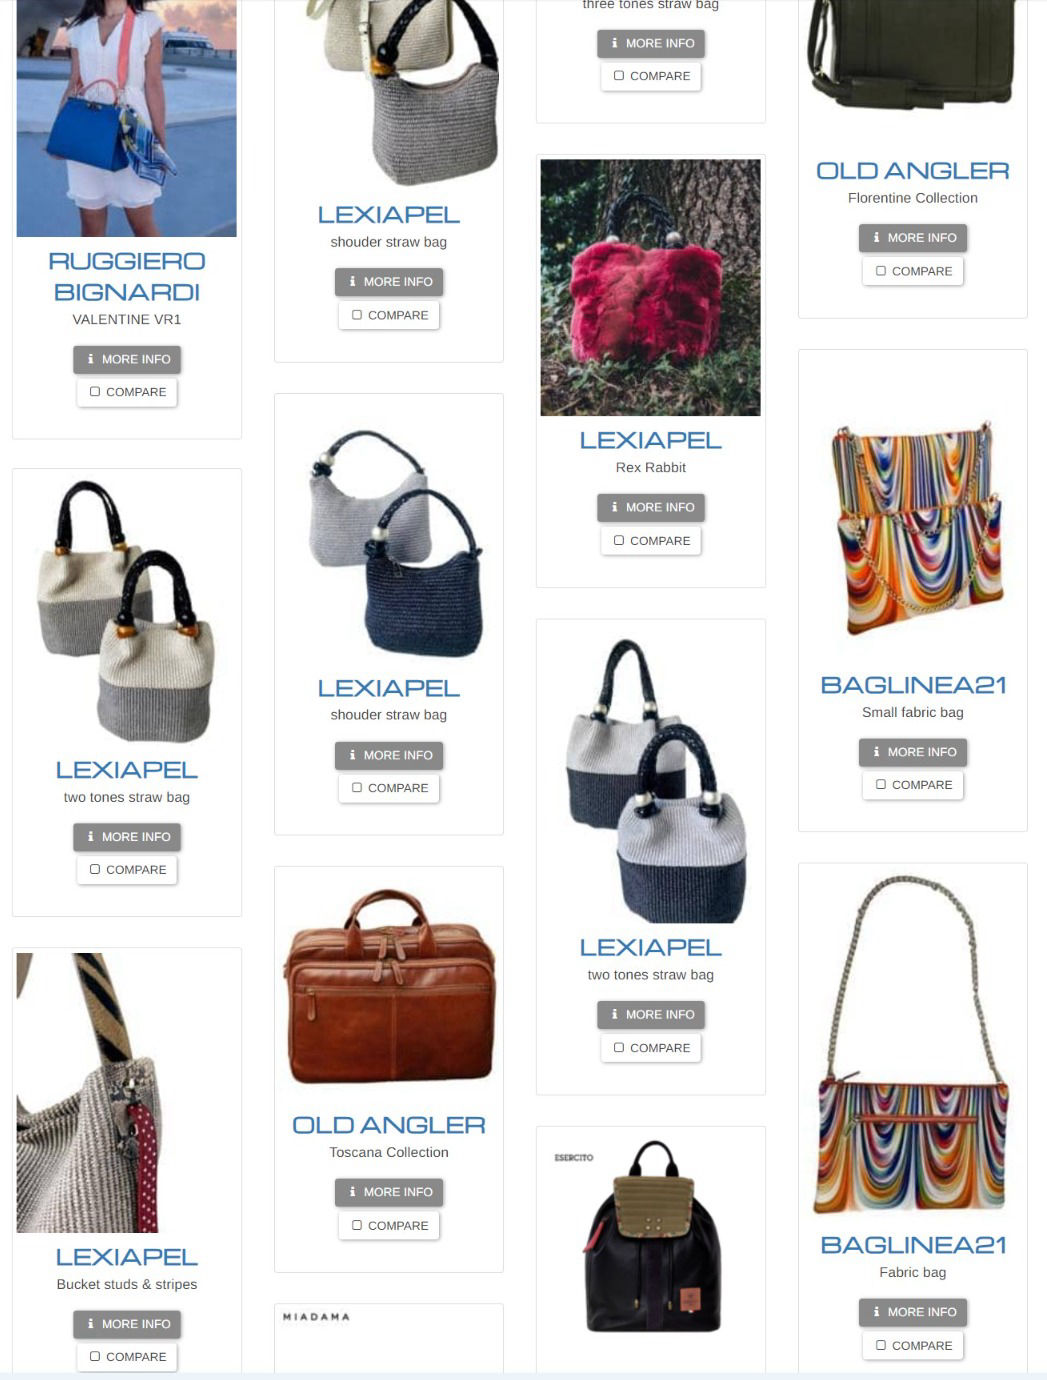 Italian luxuryu bags for private label and white label. Bag manufacturers in Italy